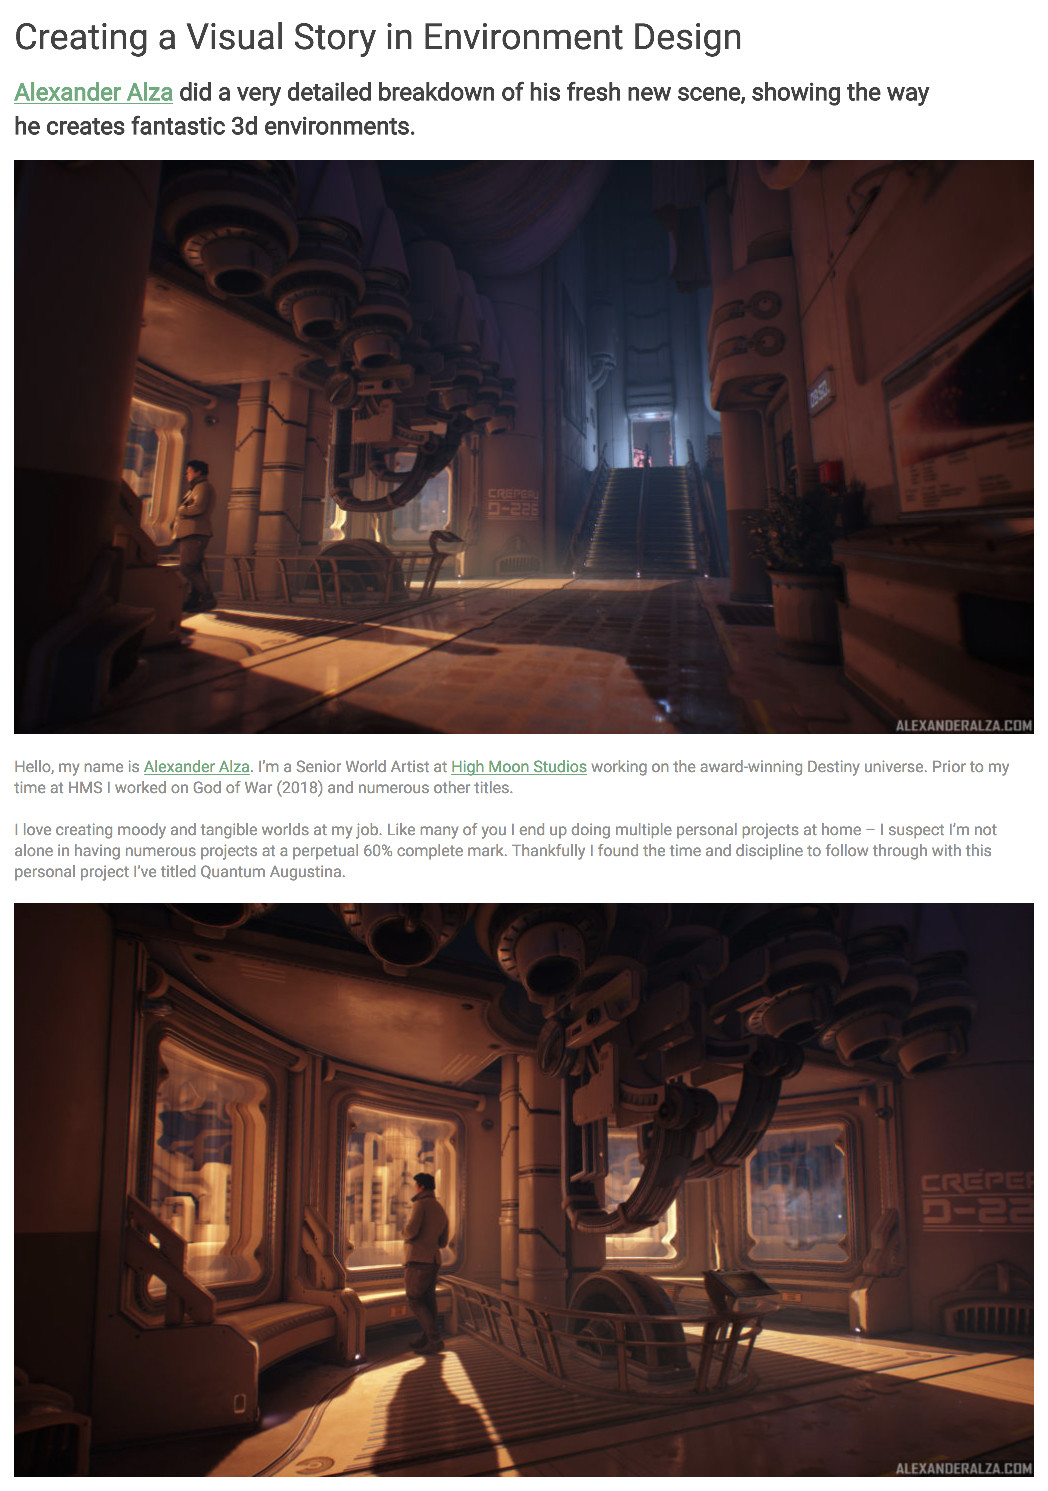 Follow this link for the full article: https://80.lv/articles/creating-a-visual-story-in-environment-design/